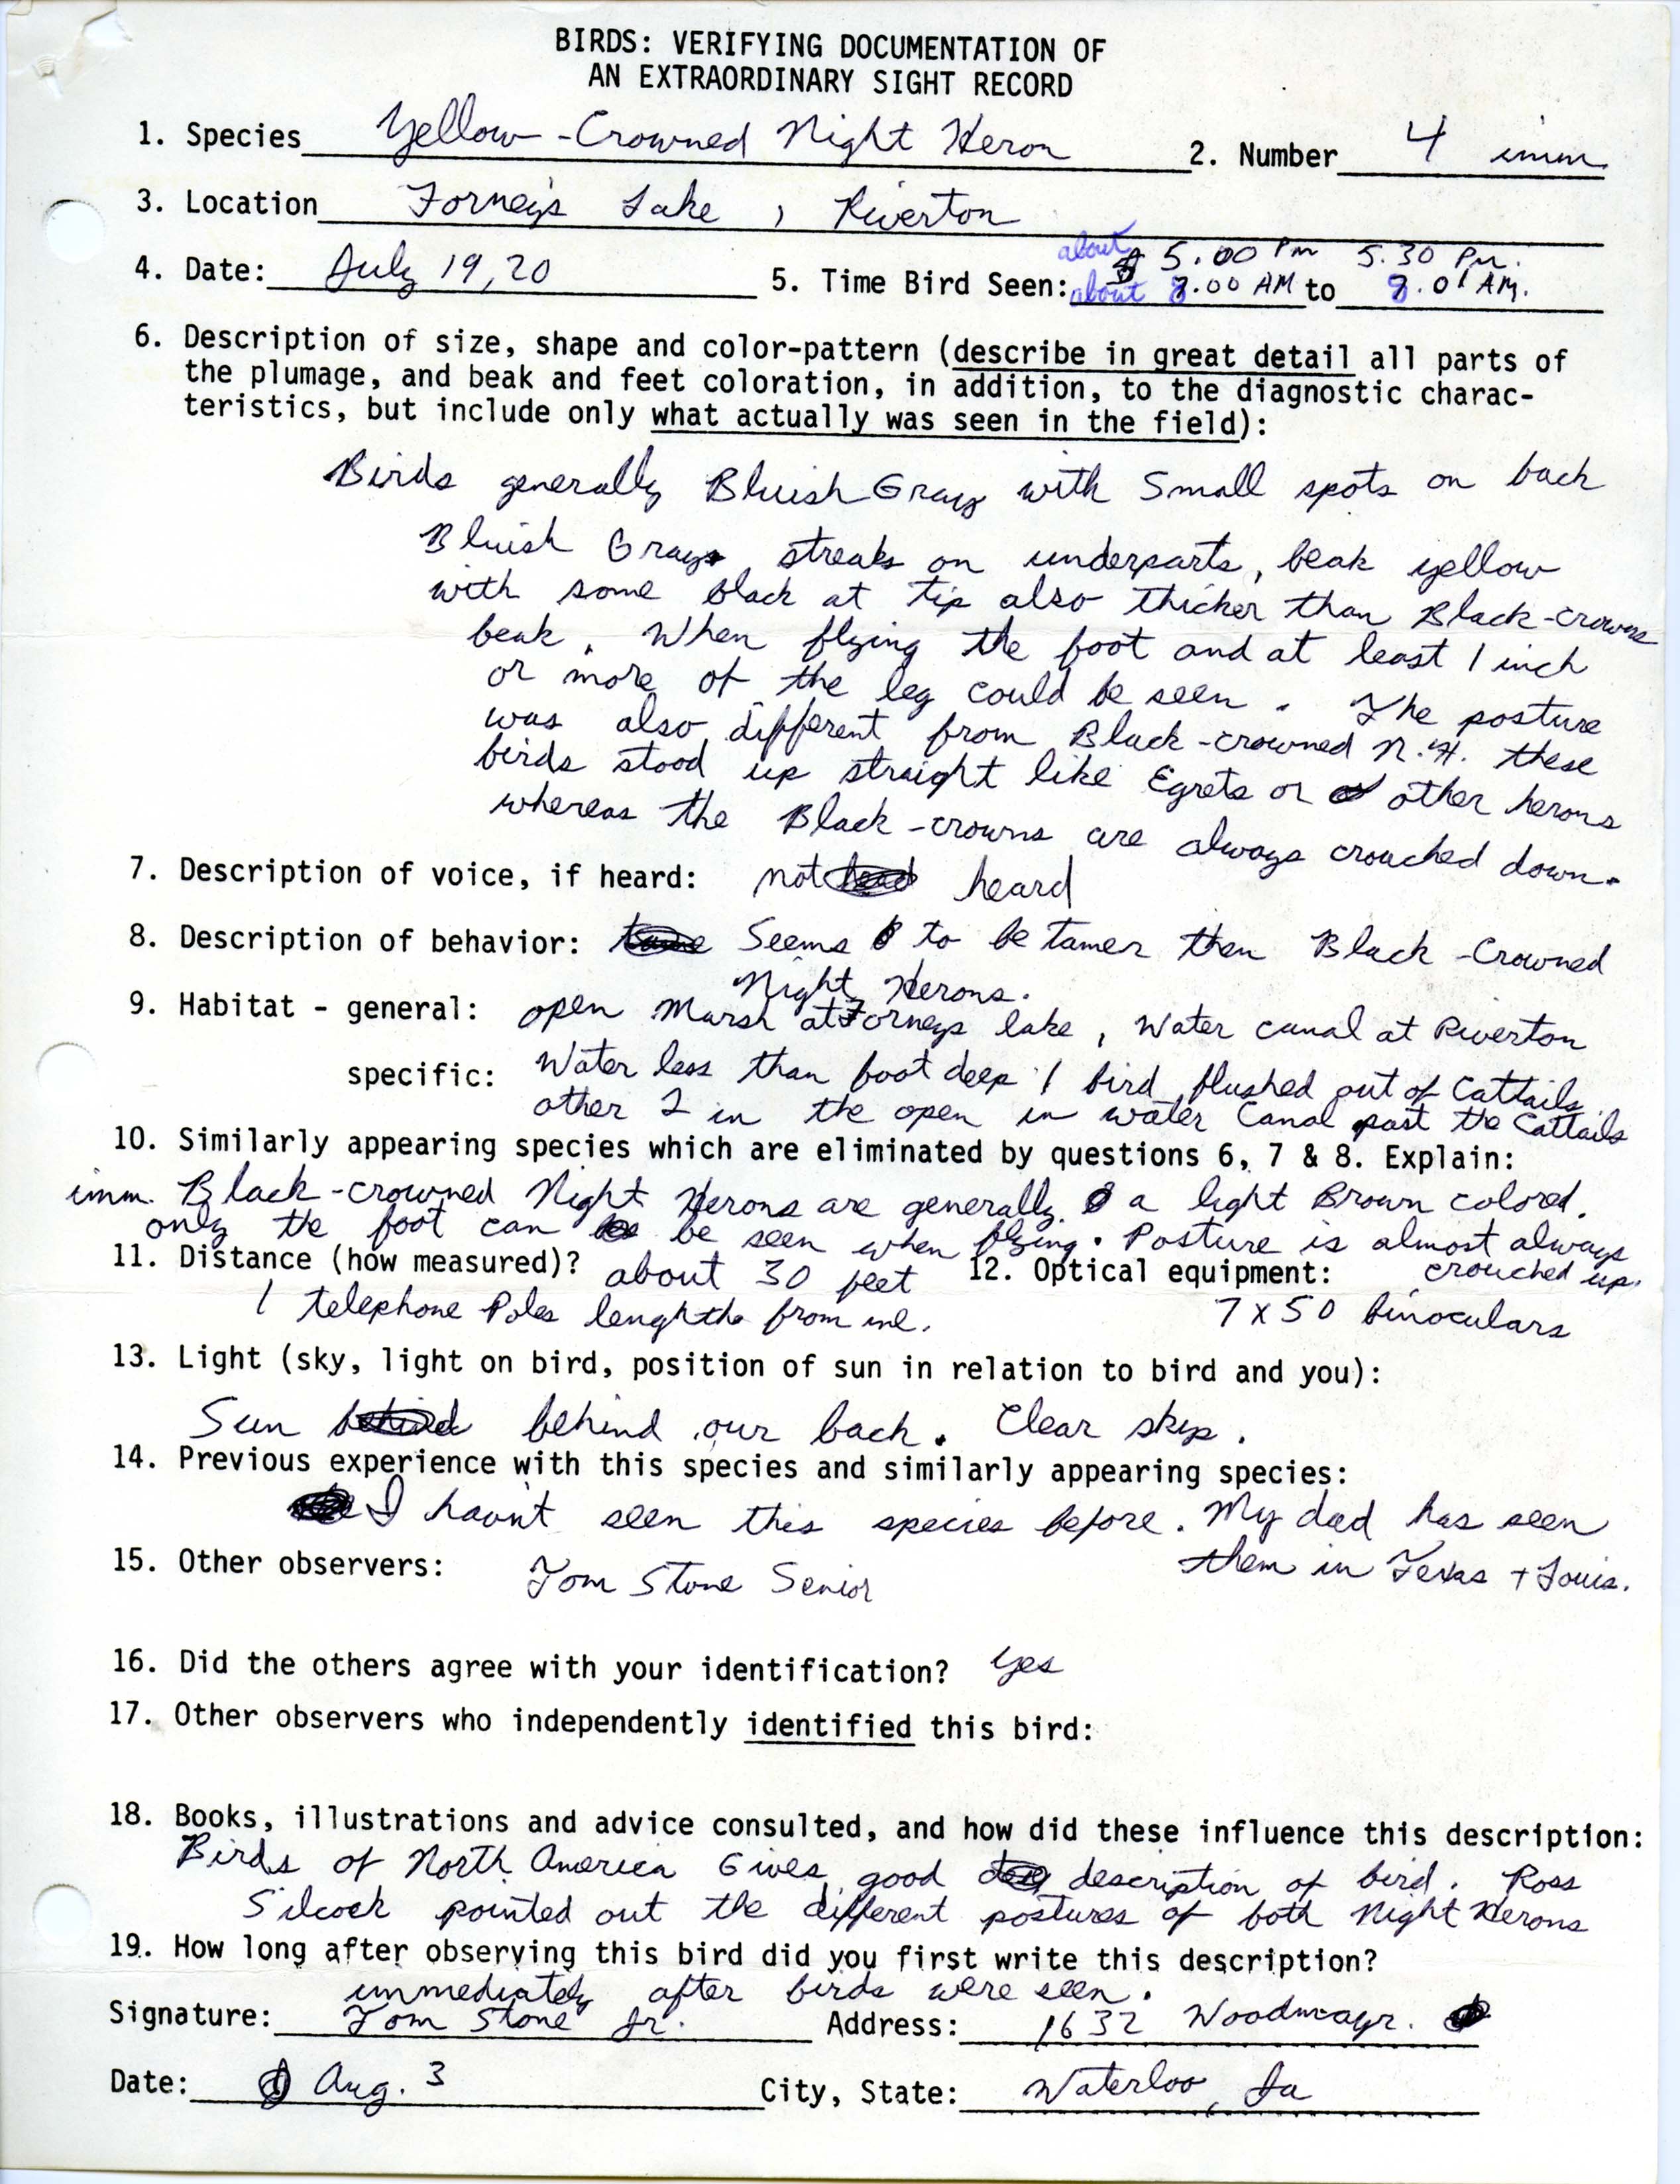 Rare bird documentation form by Tom Stone Jr. for Yellow-crowned Night Heron sightings at Forneys Lake and Riverton, 1979